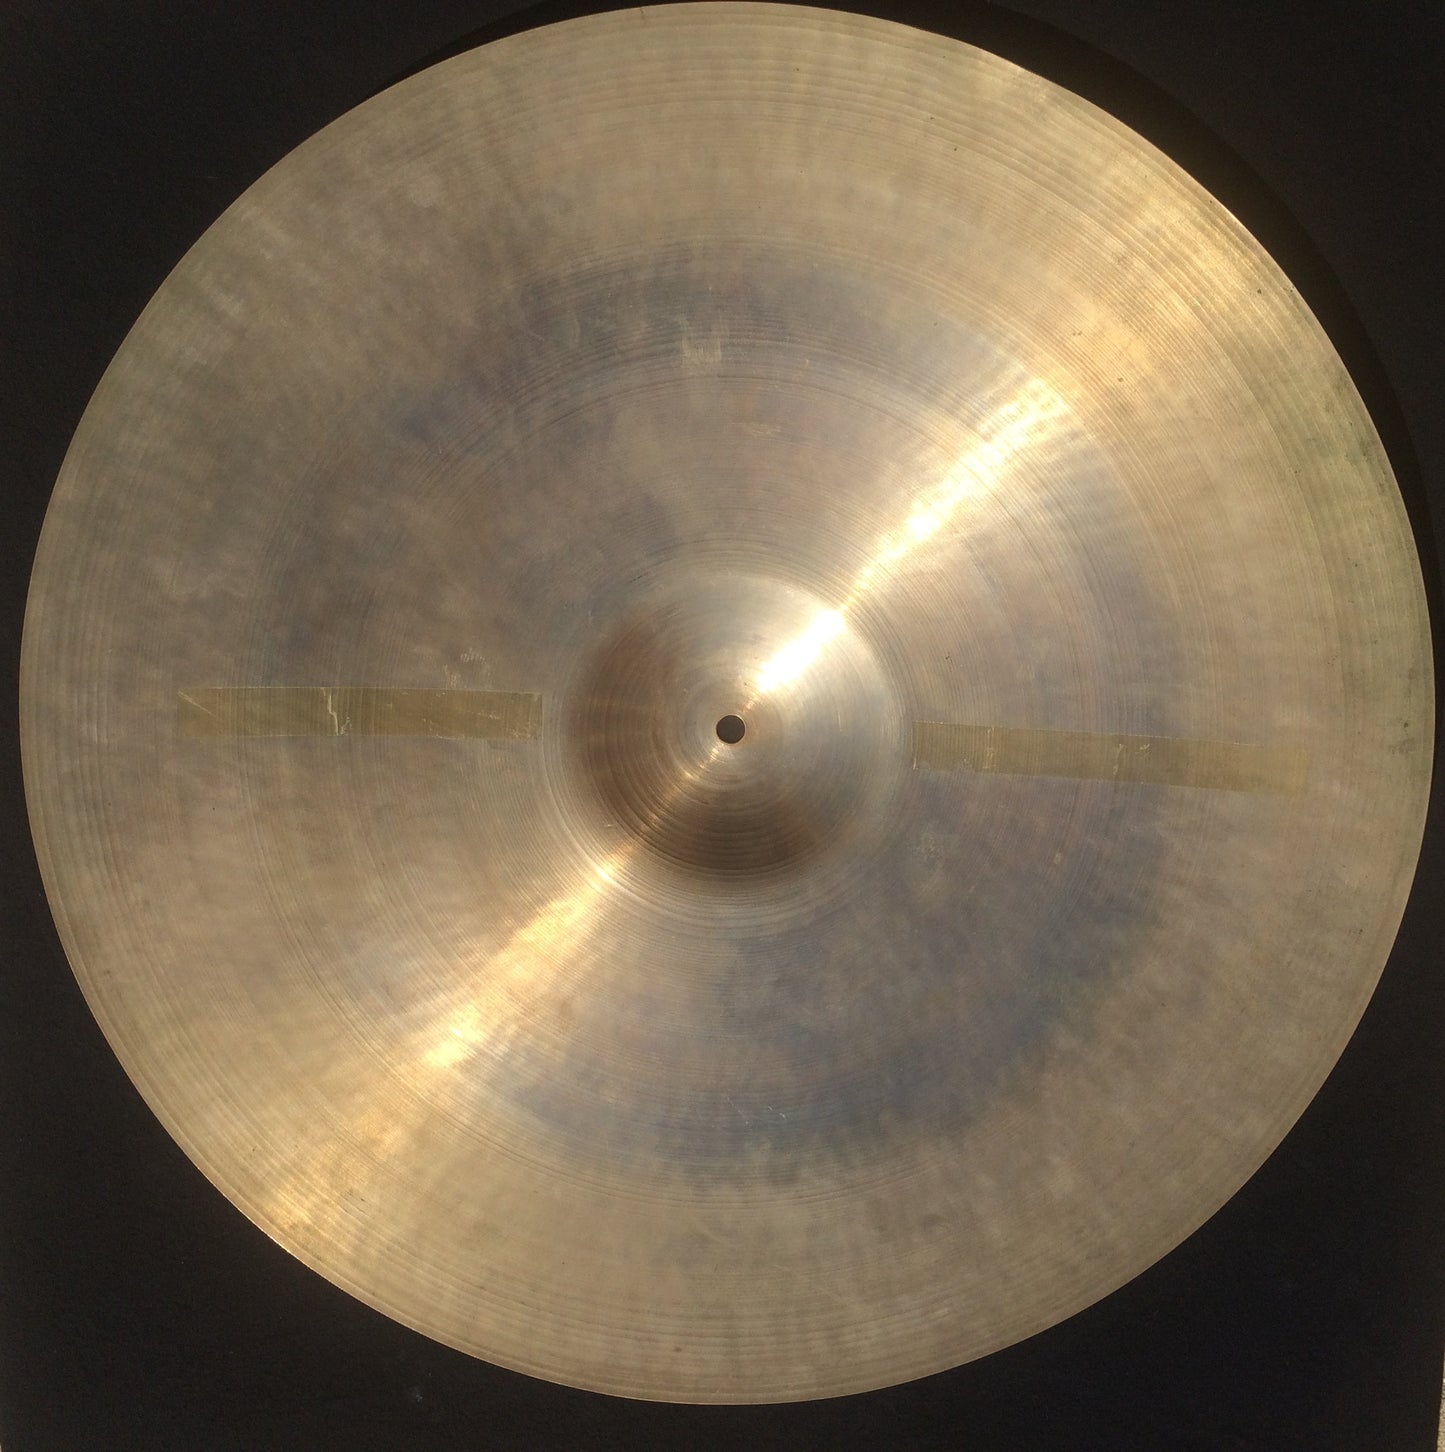 21″ Zildjian A 1950s Trans Stamp "Sweet Ride" Ride Cymbal 2144g – Inventory # 171